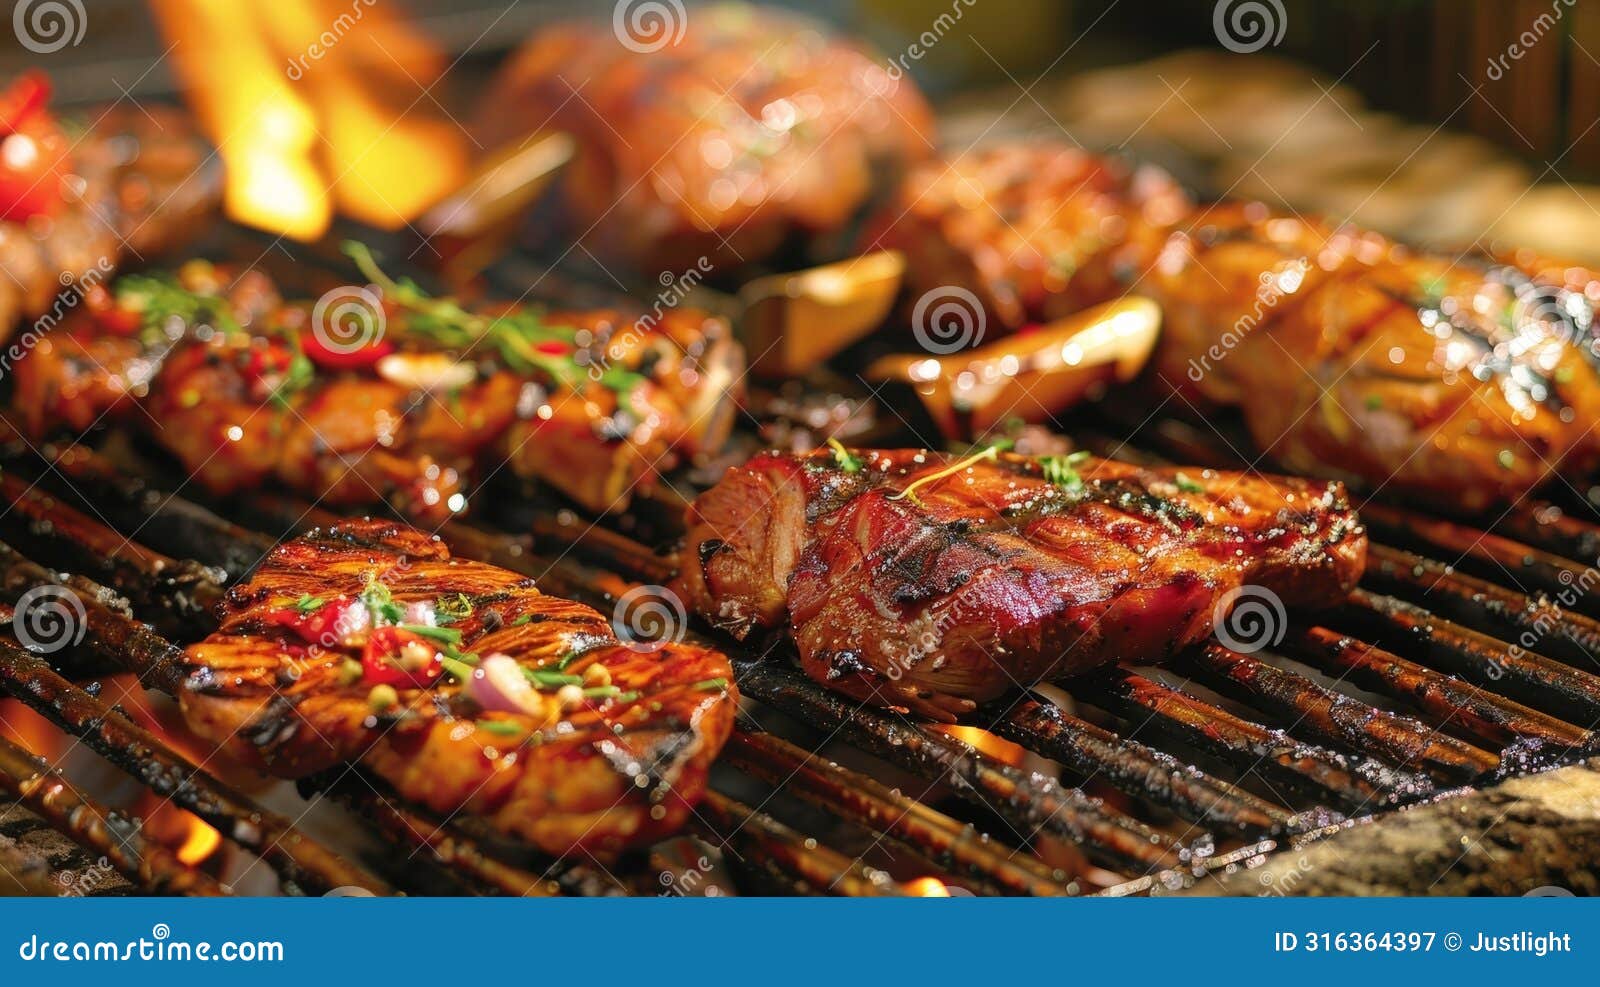 delicious aromas waft through the air as savory meats sizzle and char on the barbecue grill. 2d flat cartoon